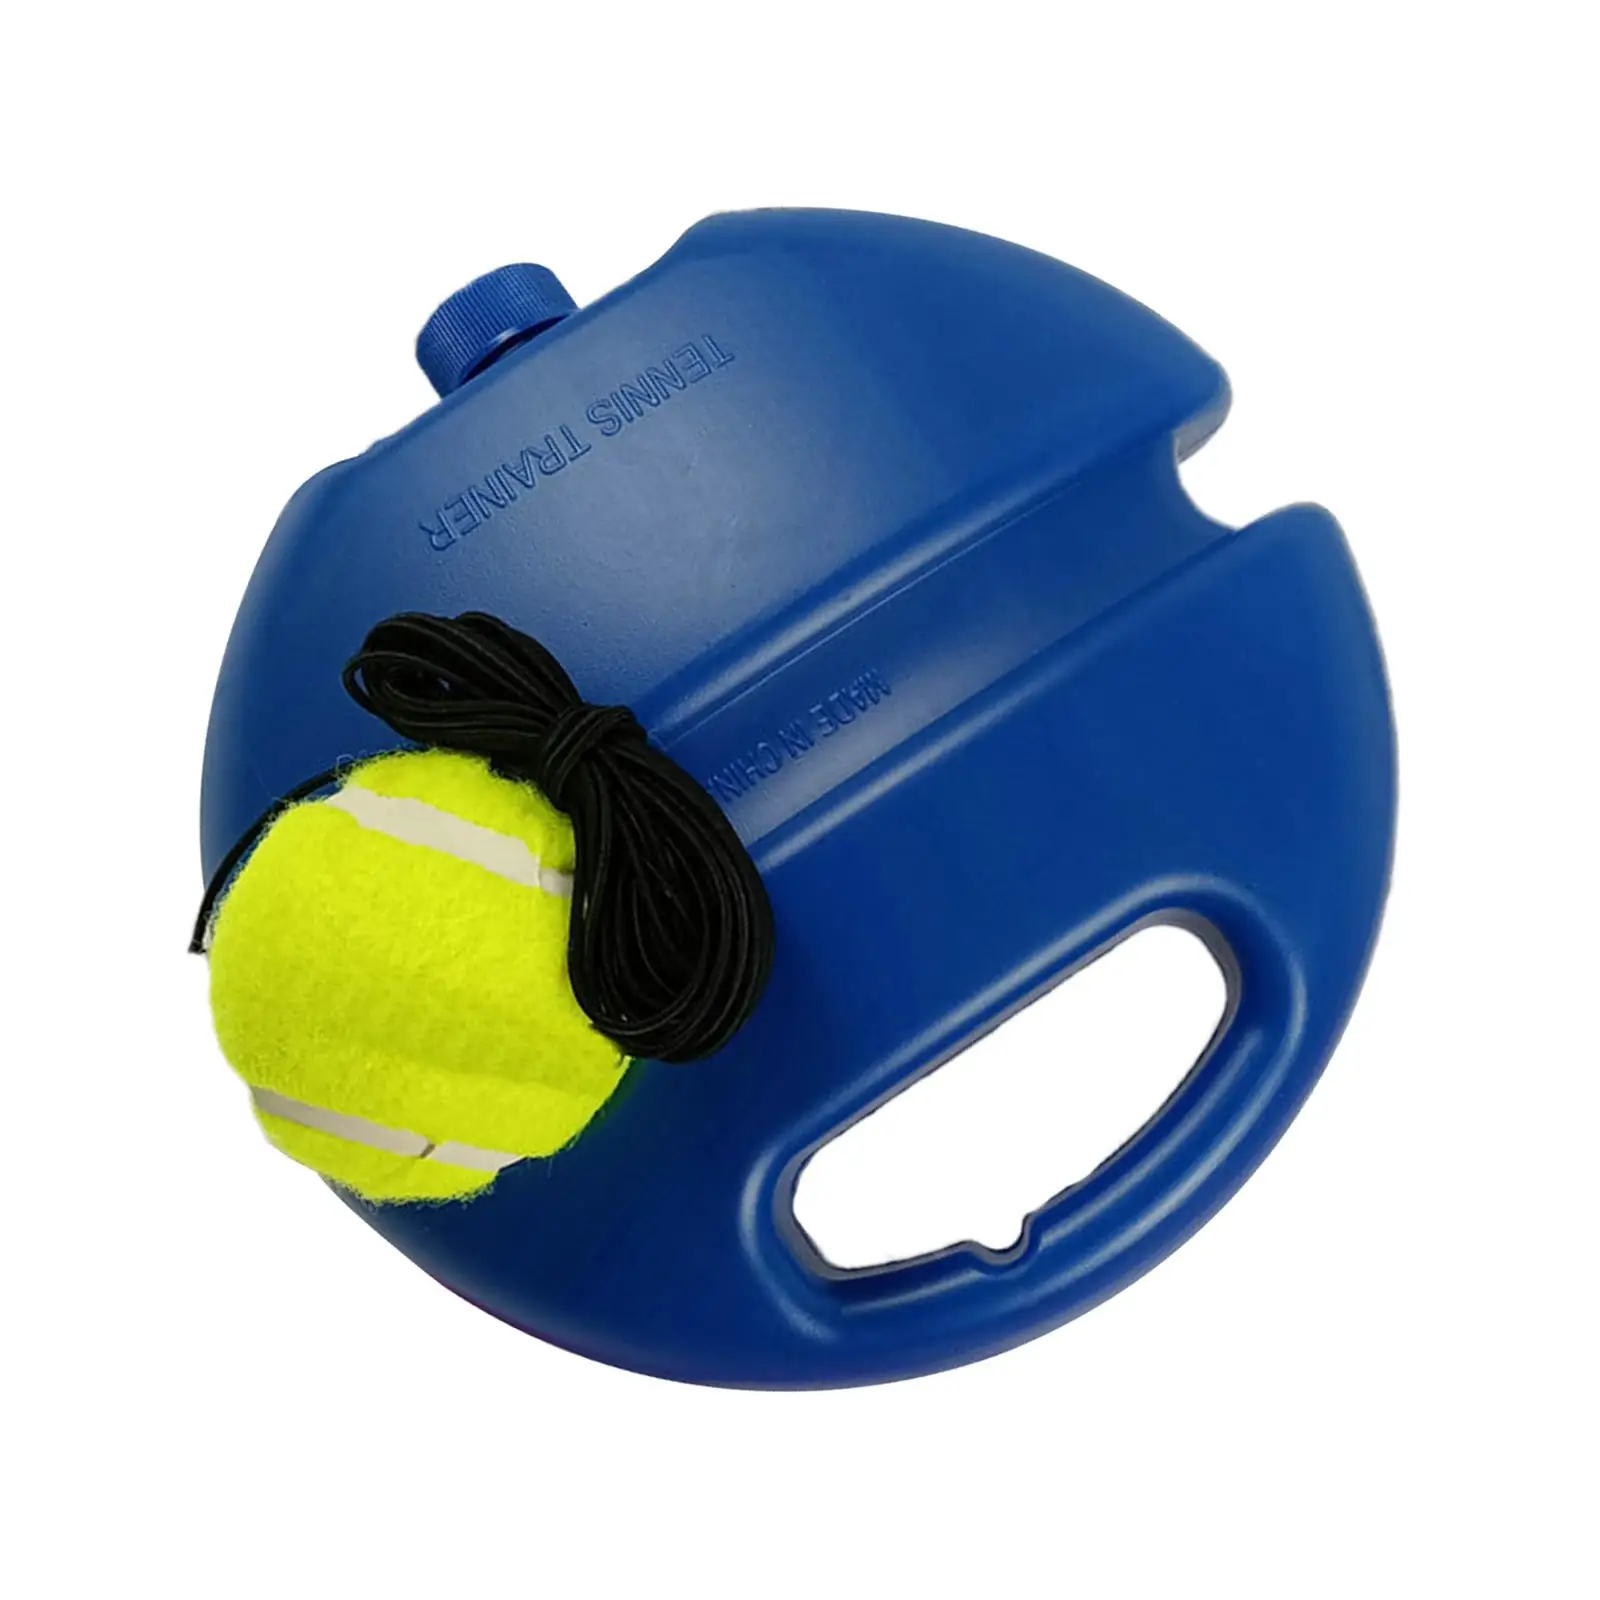 Portable Tennis Training Tool Tennis Baseboard with 1 String